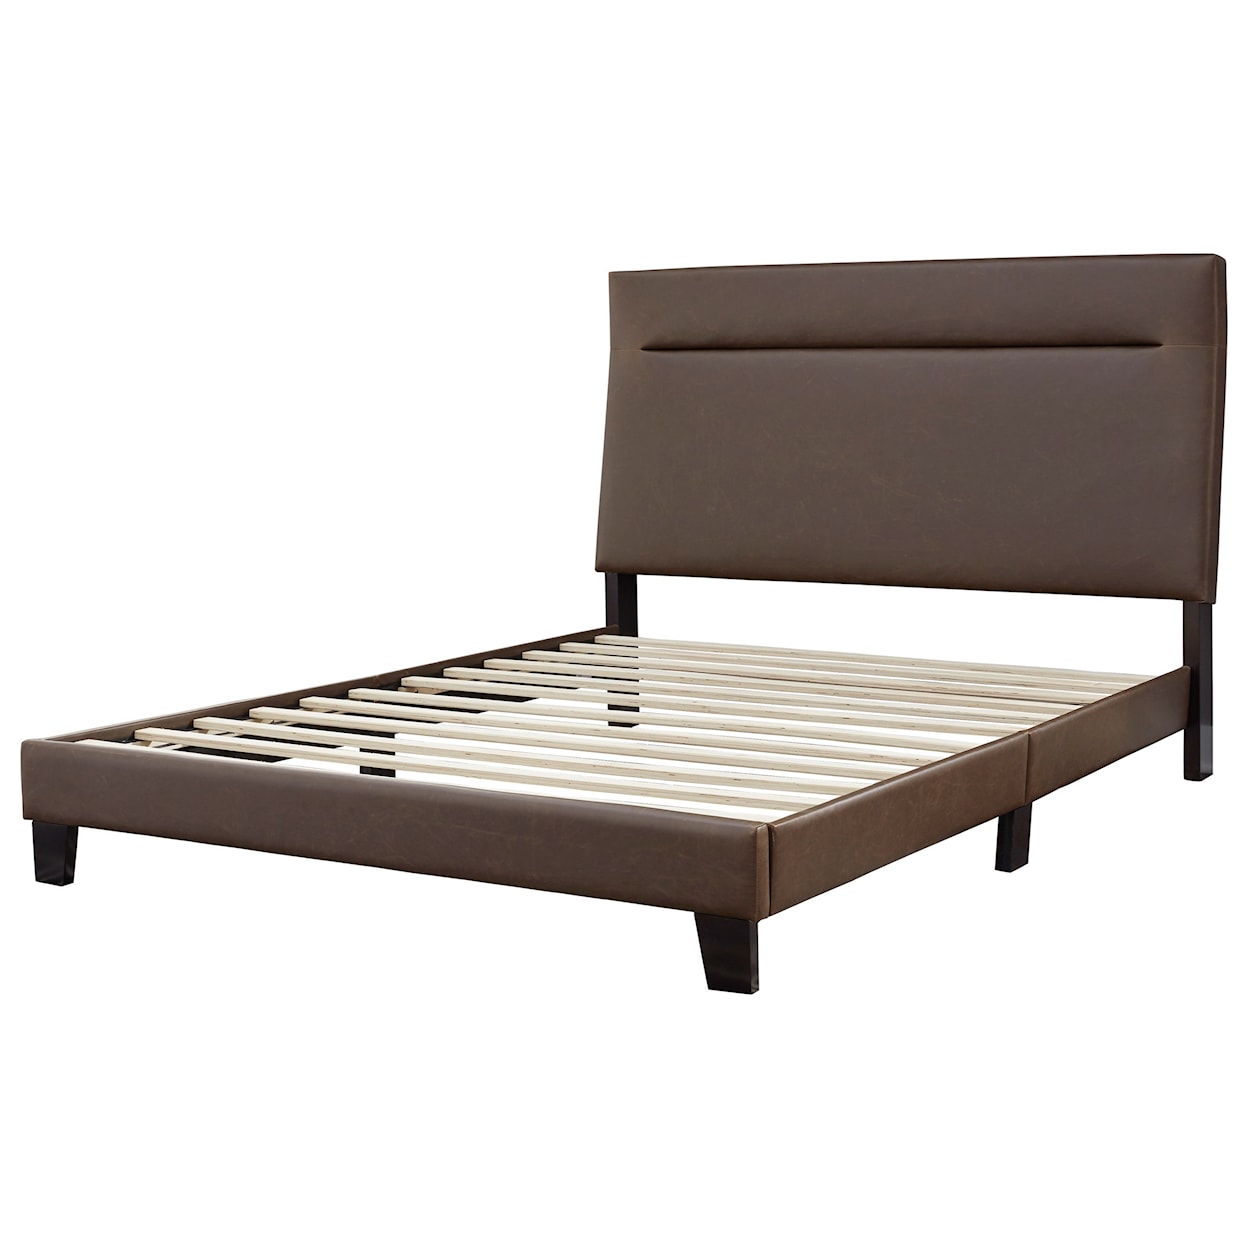 Benchcraft Adelloni Queen Upholstered Bed